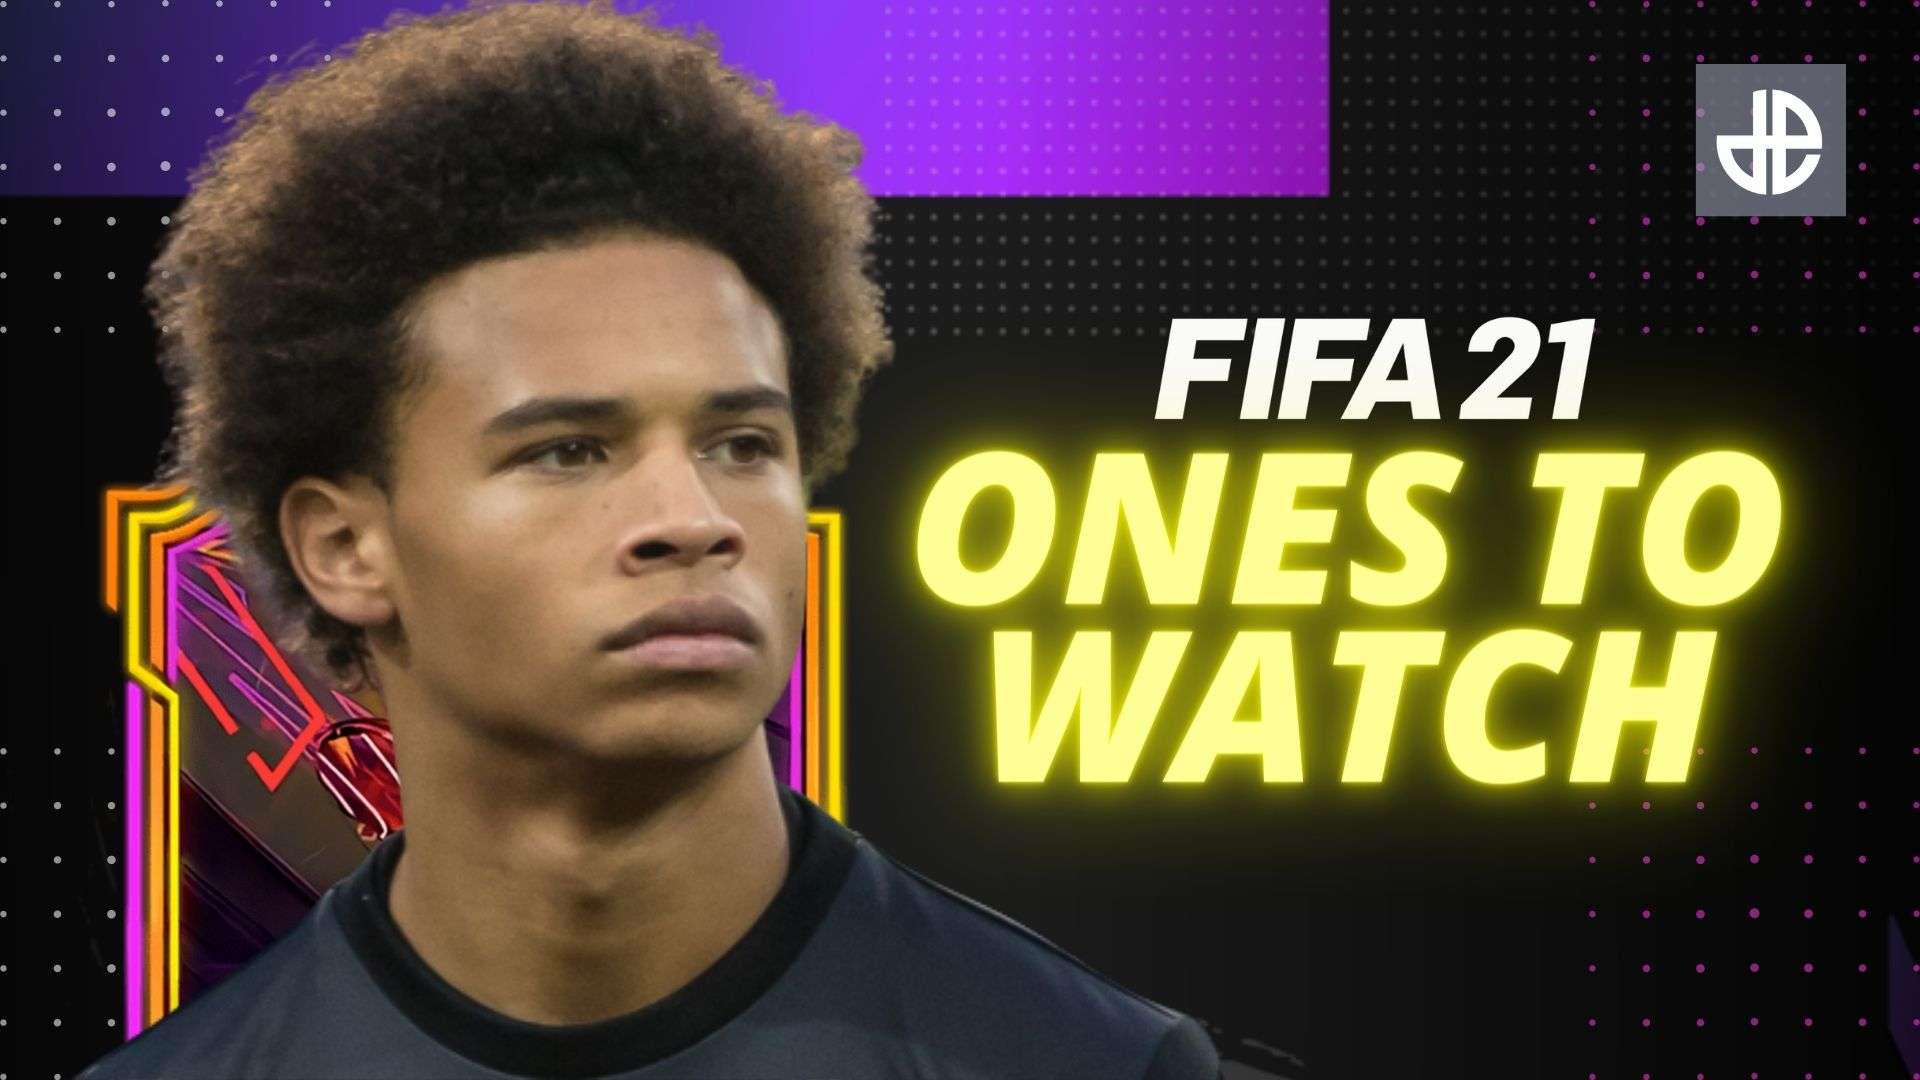 Leroy Sane Ones to Watch card FIFA 21